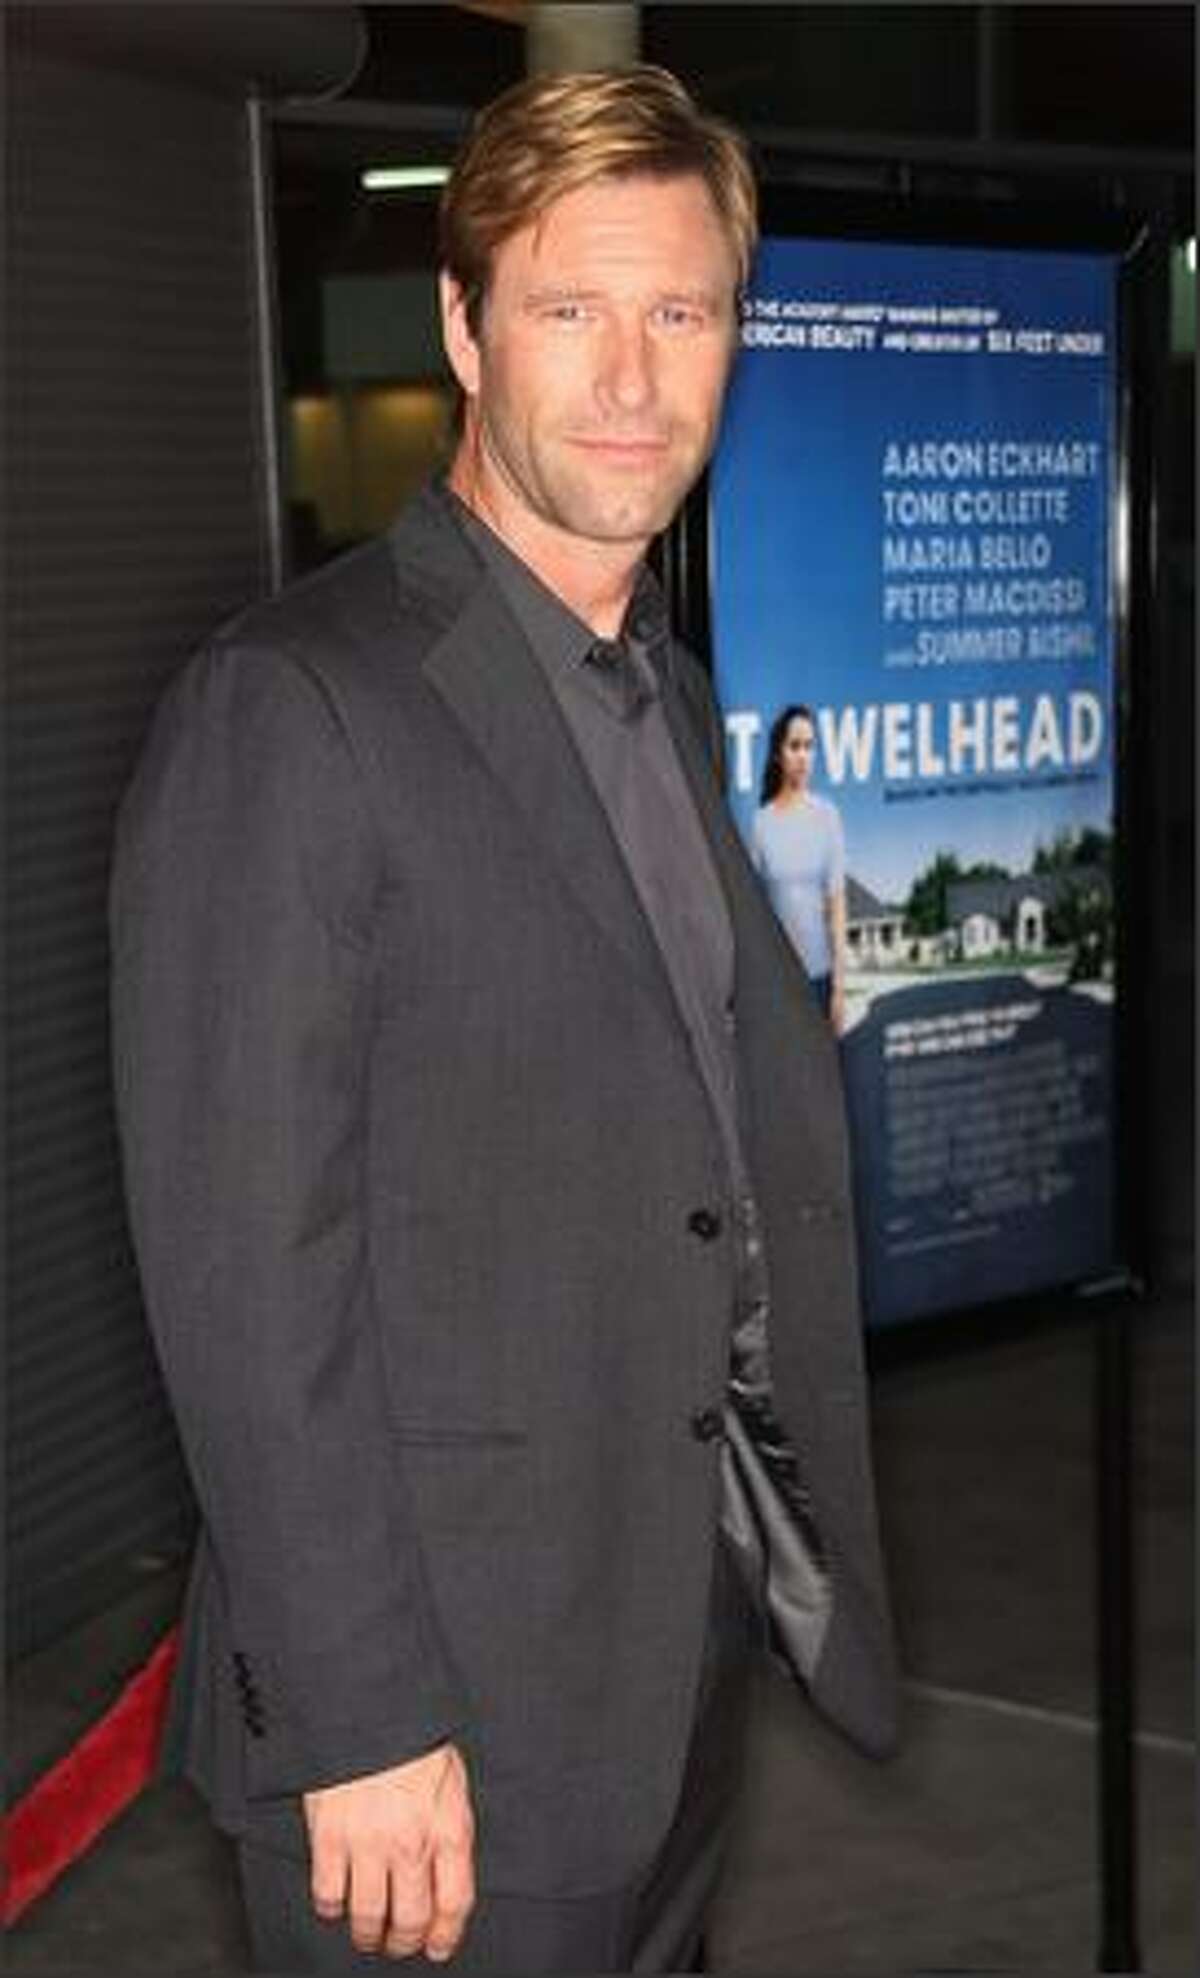 Actor Aaron Eckhart attends the "Towelhead" film premiere at the Arclight Cinemas on Wednesday in Hollywood, Calif.